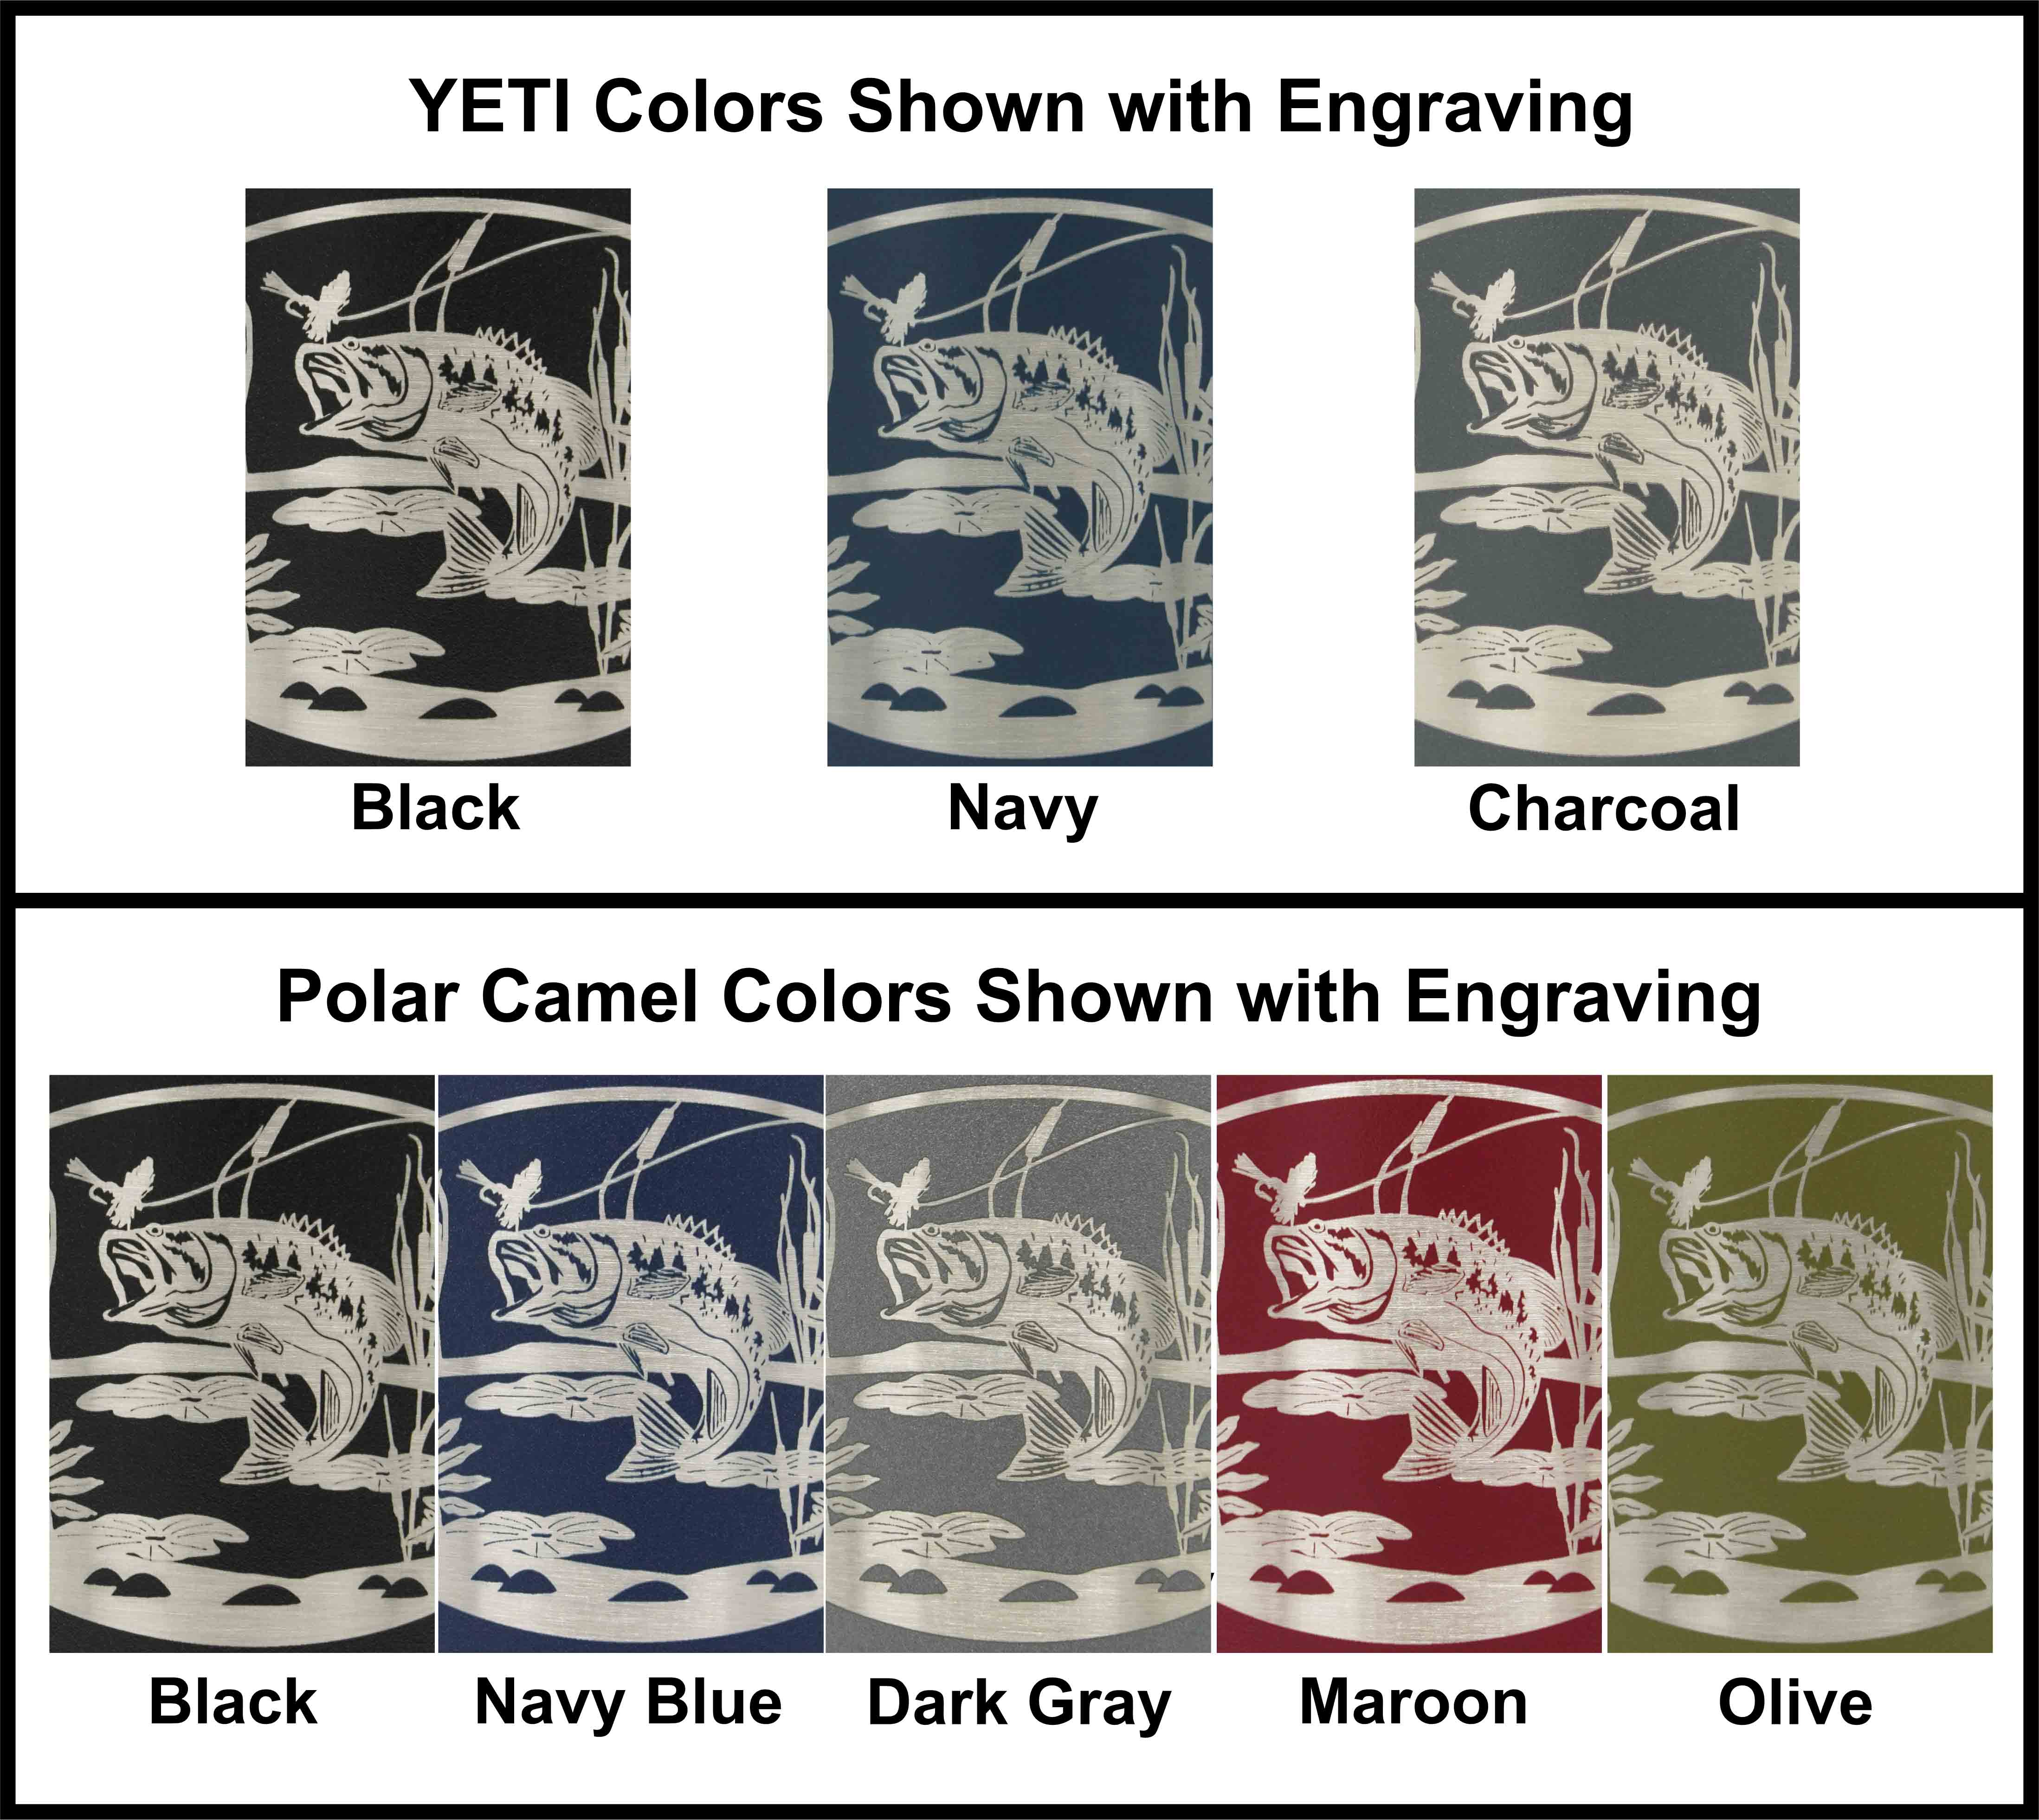 Laser engraved bass fishing scene shown in all YETI and Polar Camel colors.